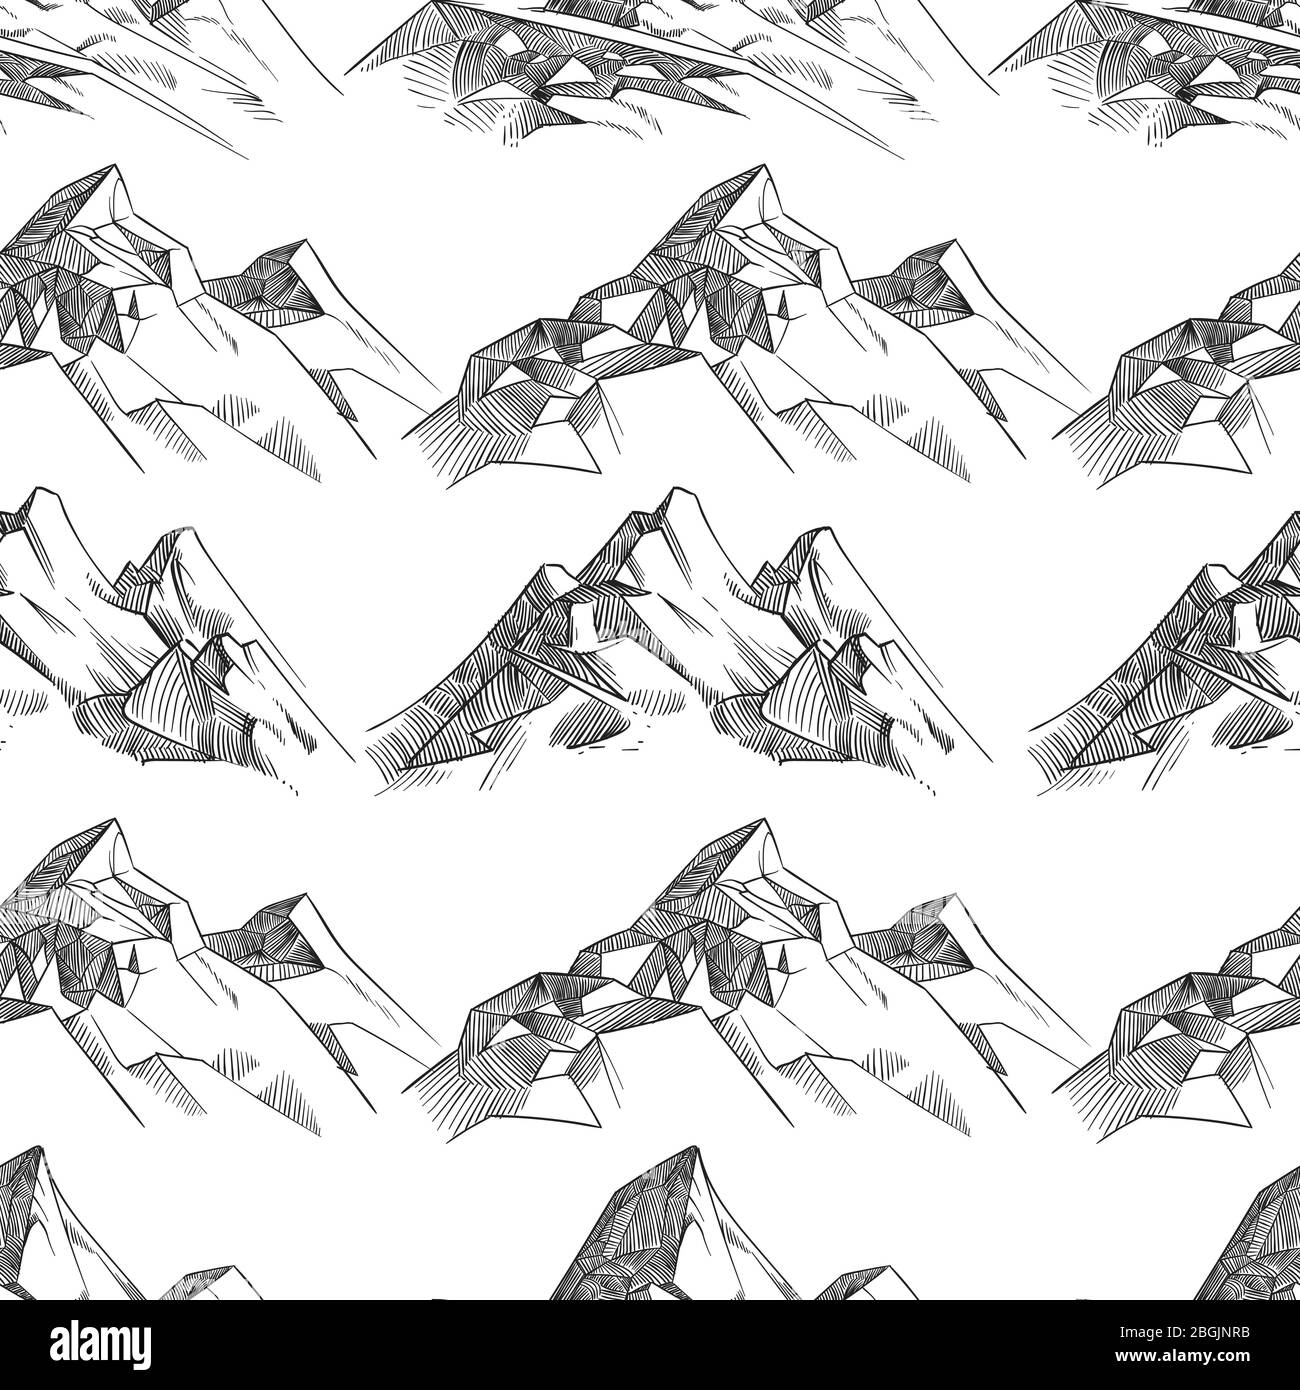 Pencil sketched mountains seamless pattern monochrome black background. Vector illustration Stock Vector